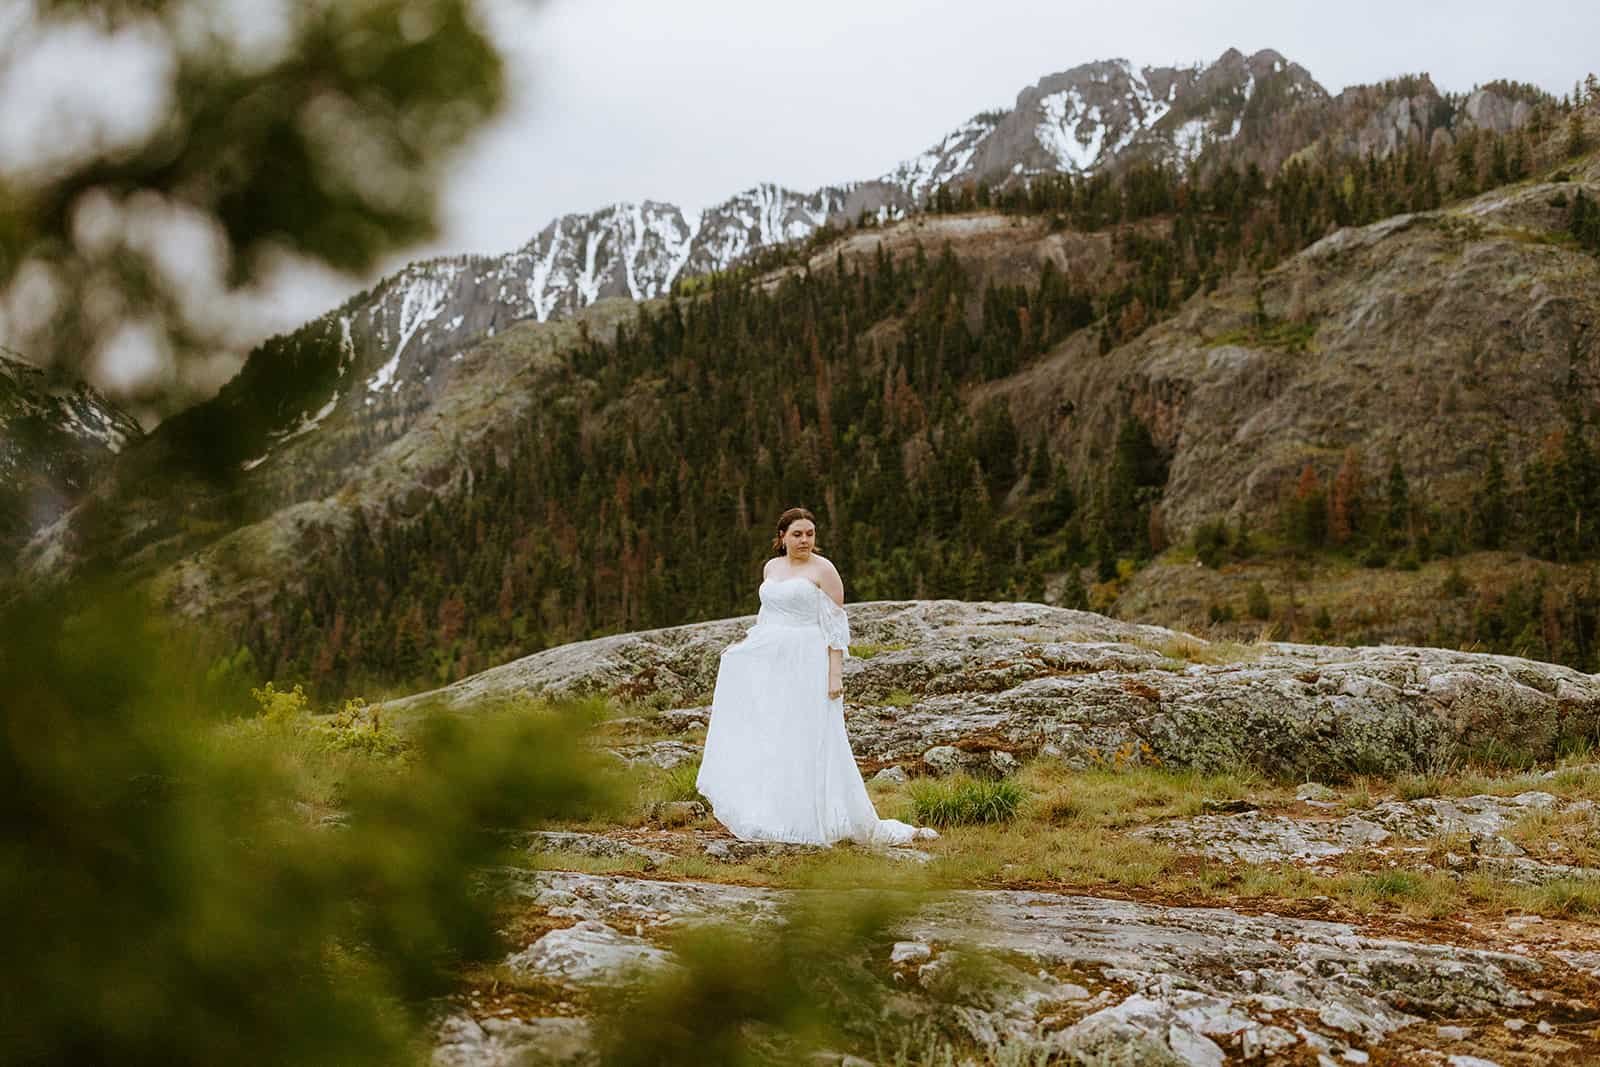 A woman twirls in her wedding dress in front of mountains